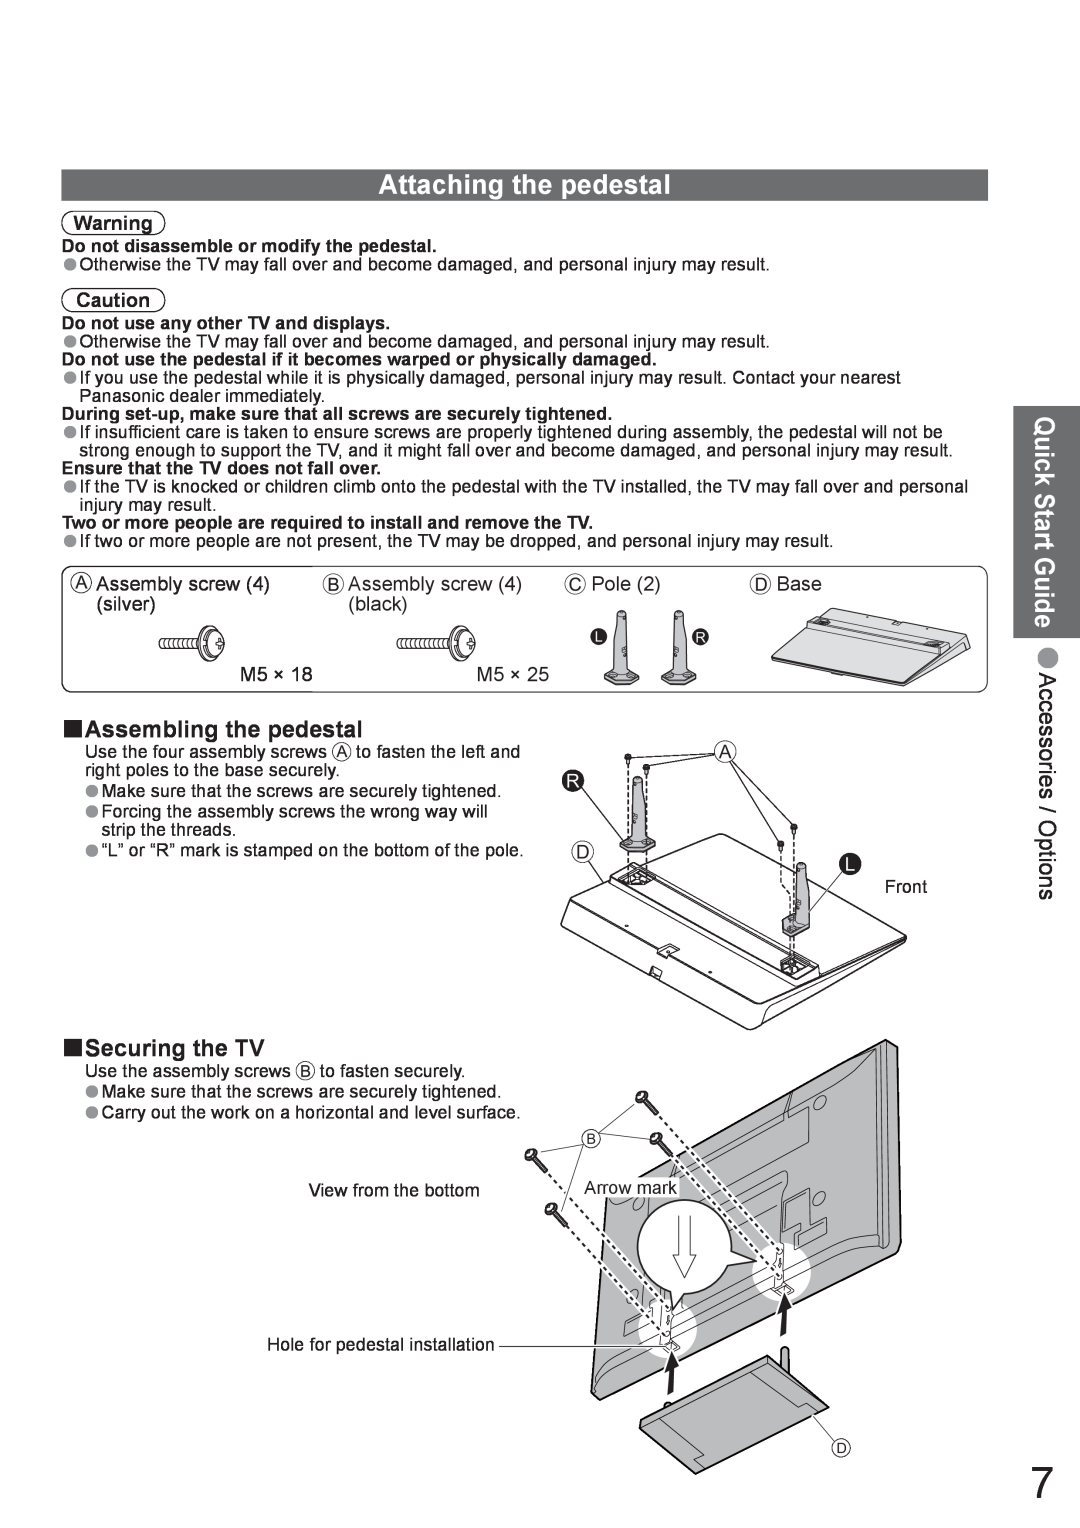 Panasonic TH-42PV80AZ Attaching the pedestal, Quick Start Guide, Accessories / Options, Assembly screw, Pole, Base, silver 